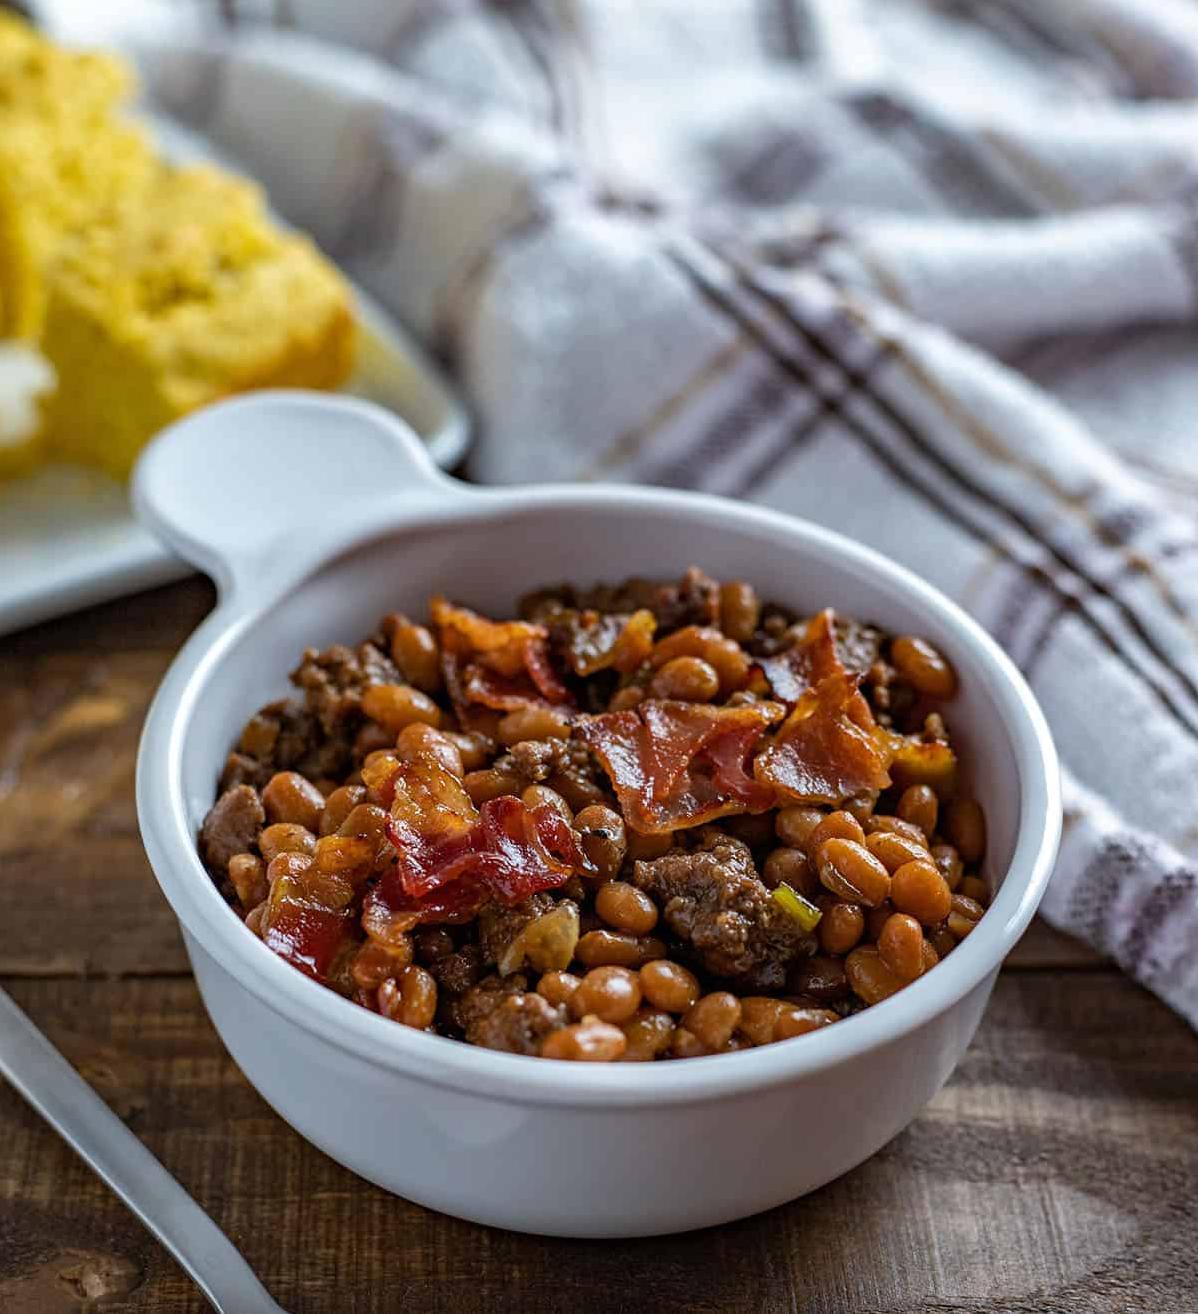  Nothing beats the smell of a freshly baked bean casserole!